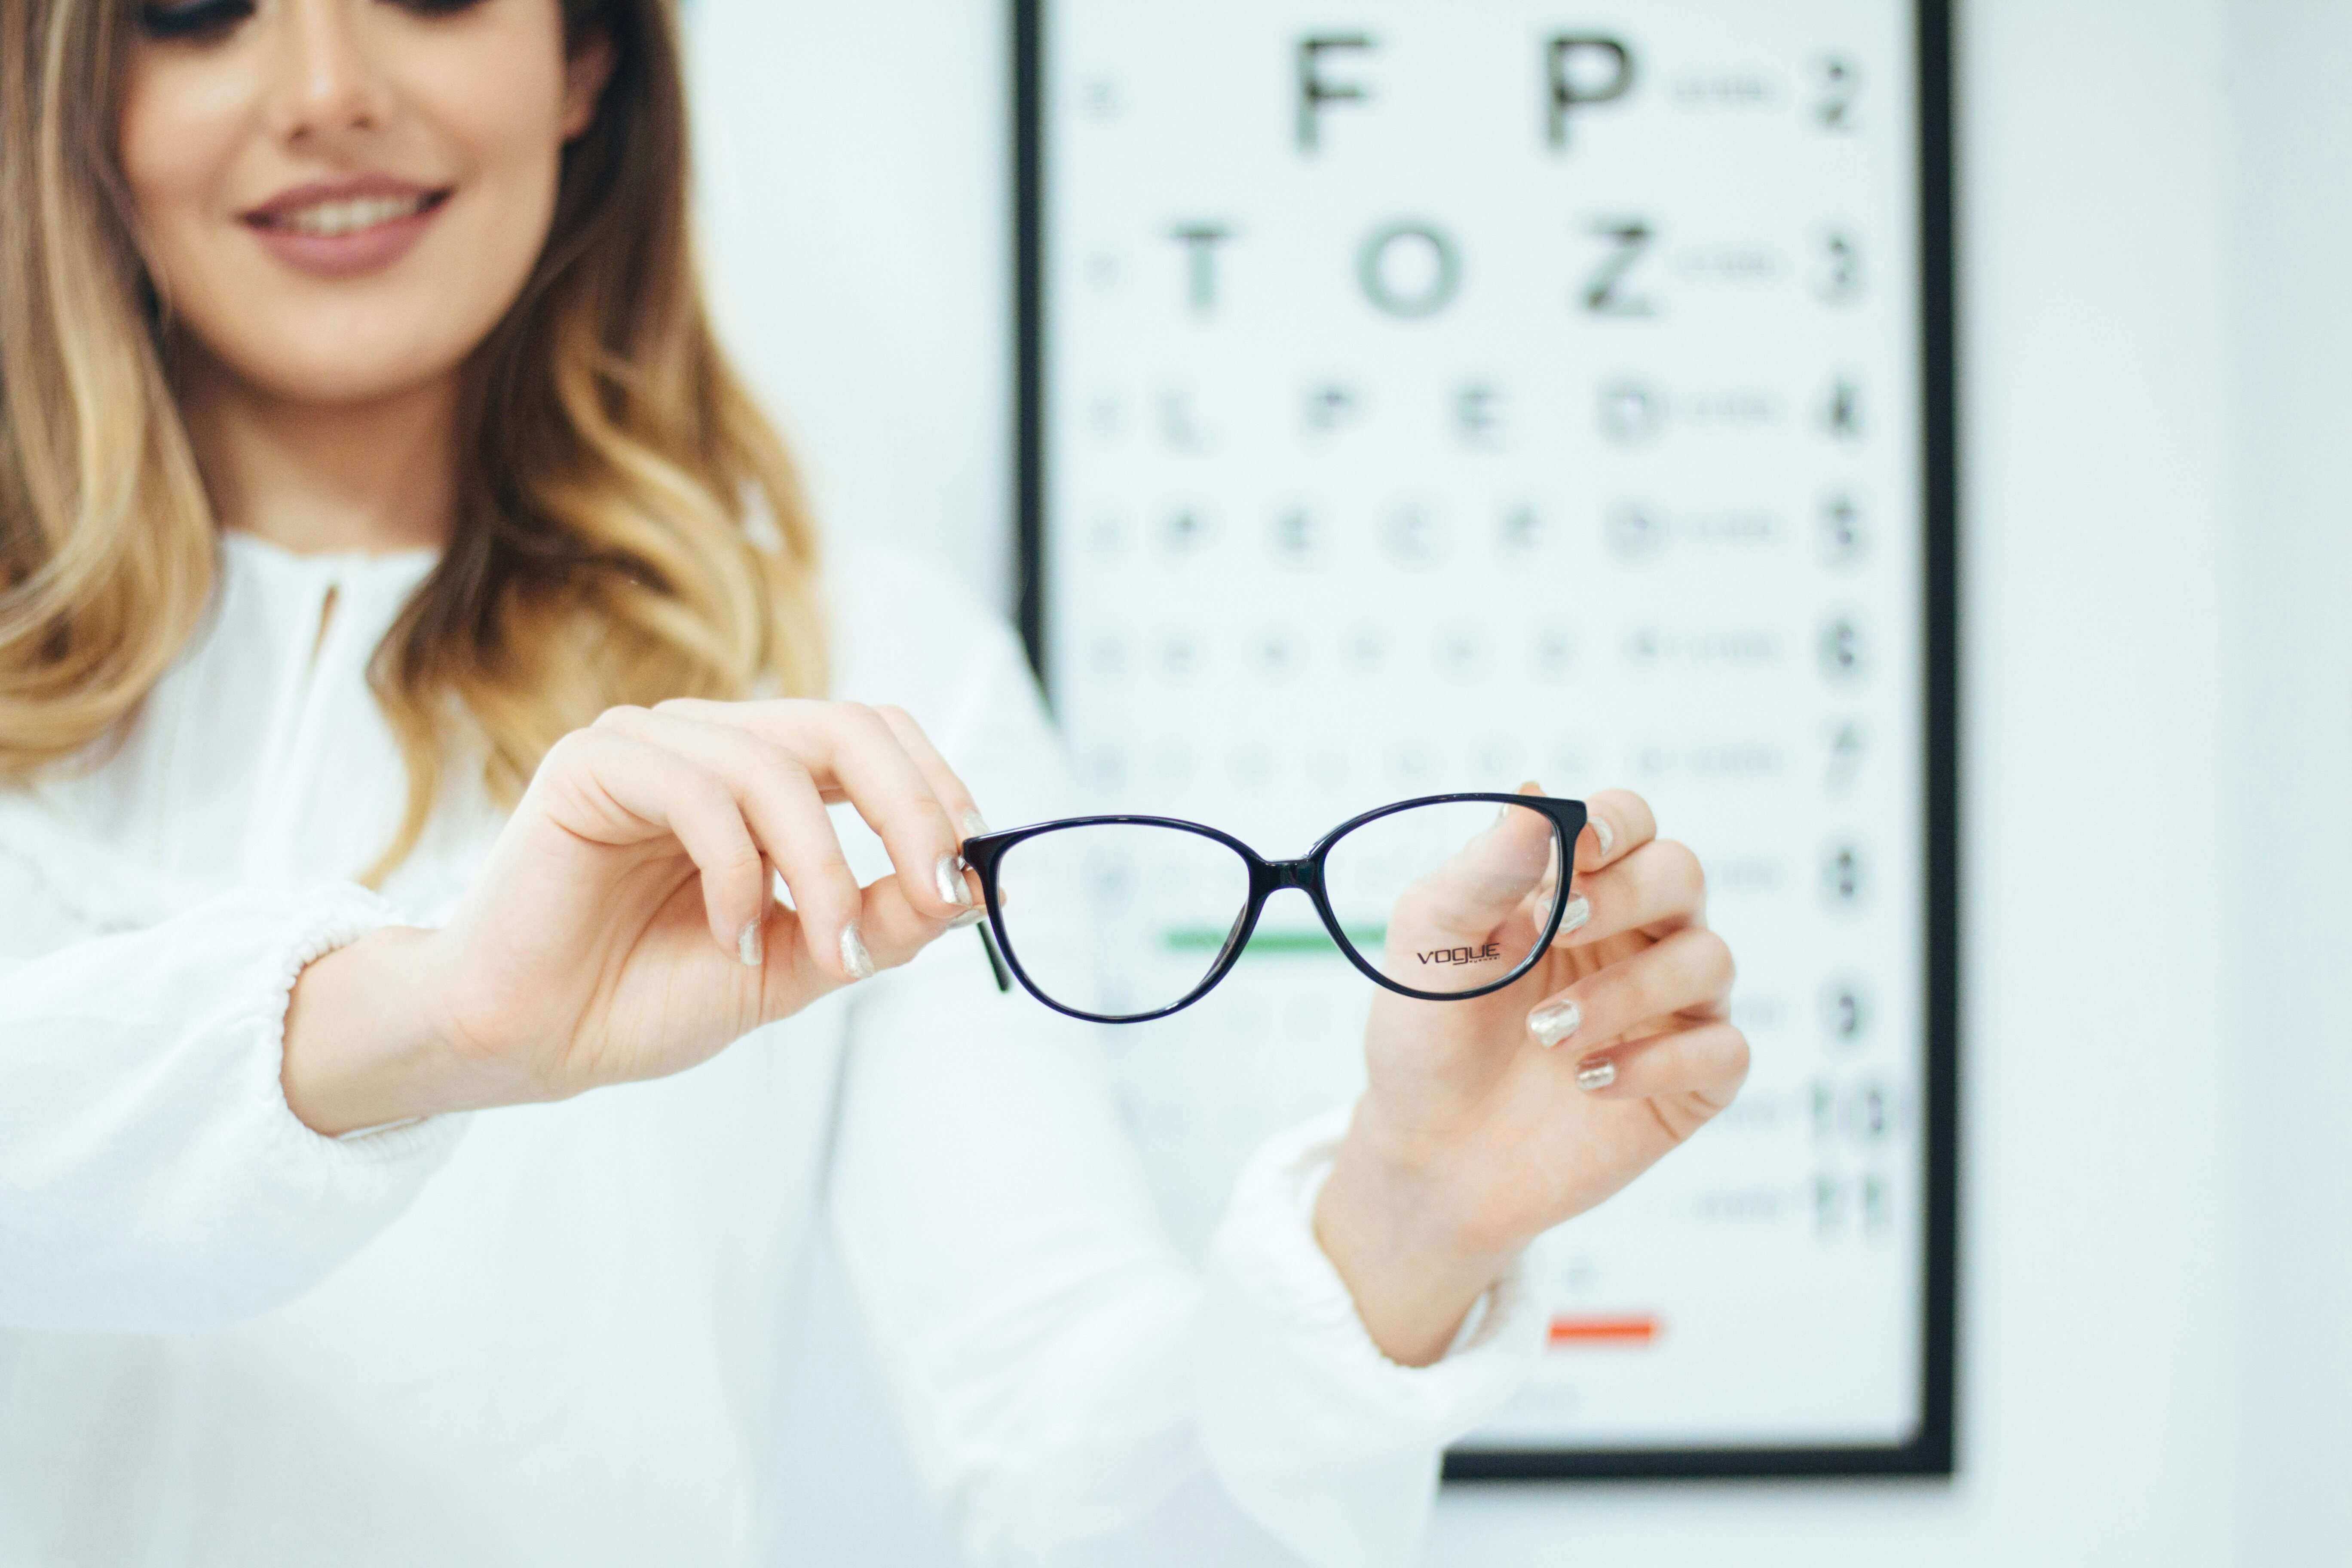 How ANSI Standards for Glasses Are Setting Industry Benchmarks